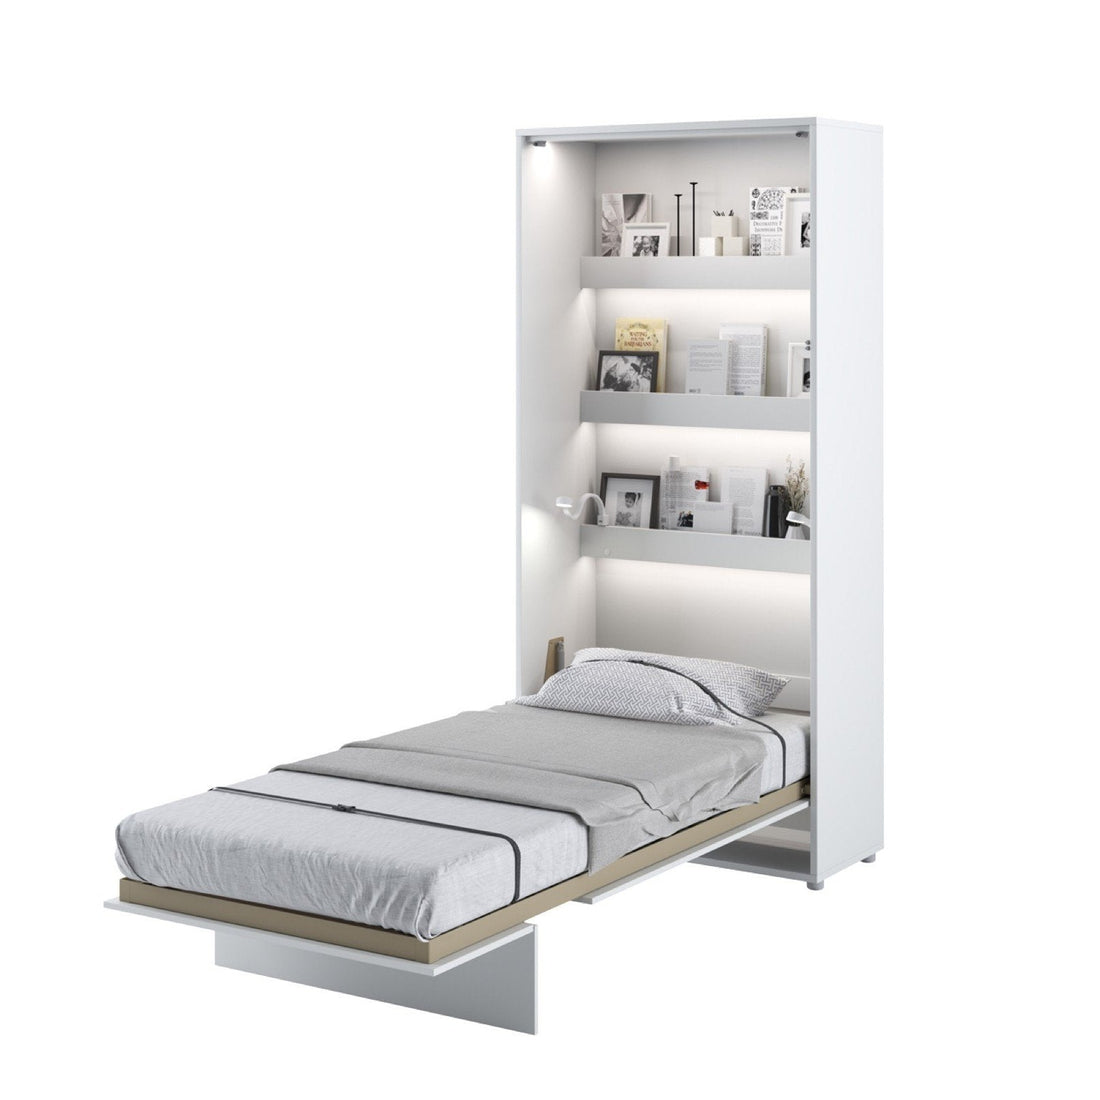 BC-03 Vertical Wall Bed Concept 90cm - £788.4 - Wall Bed 